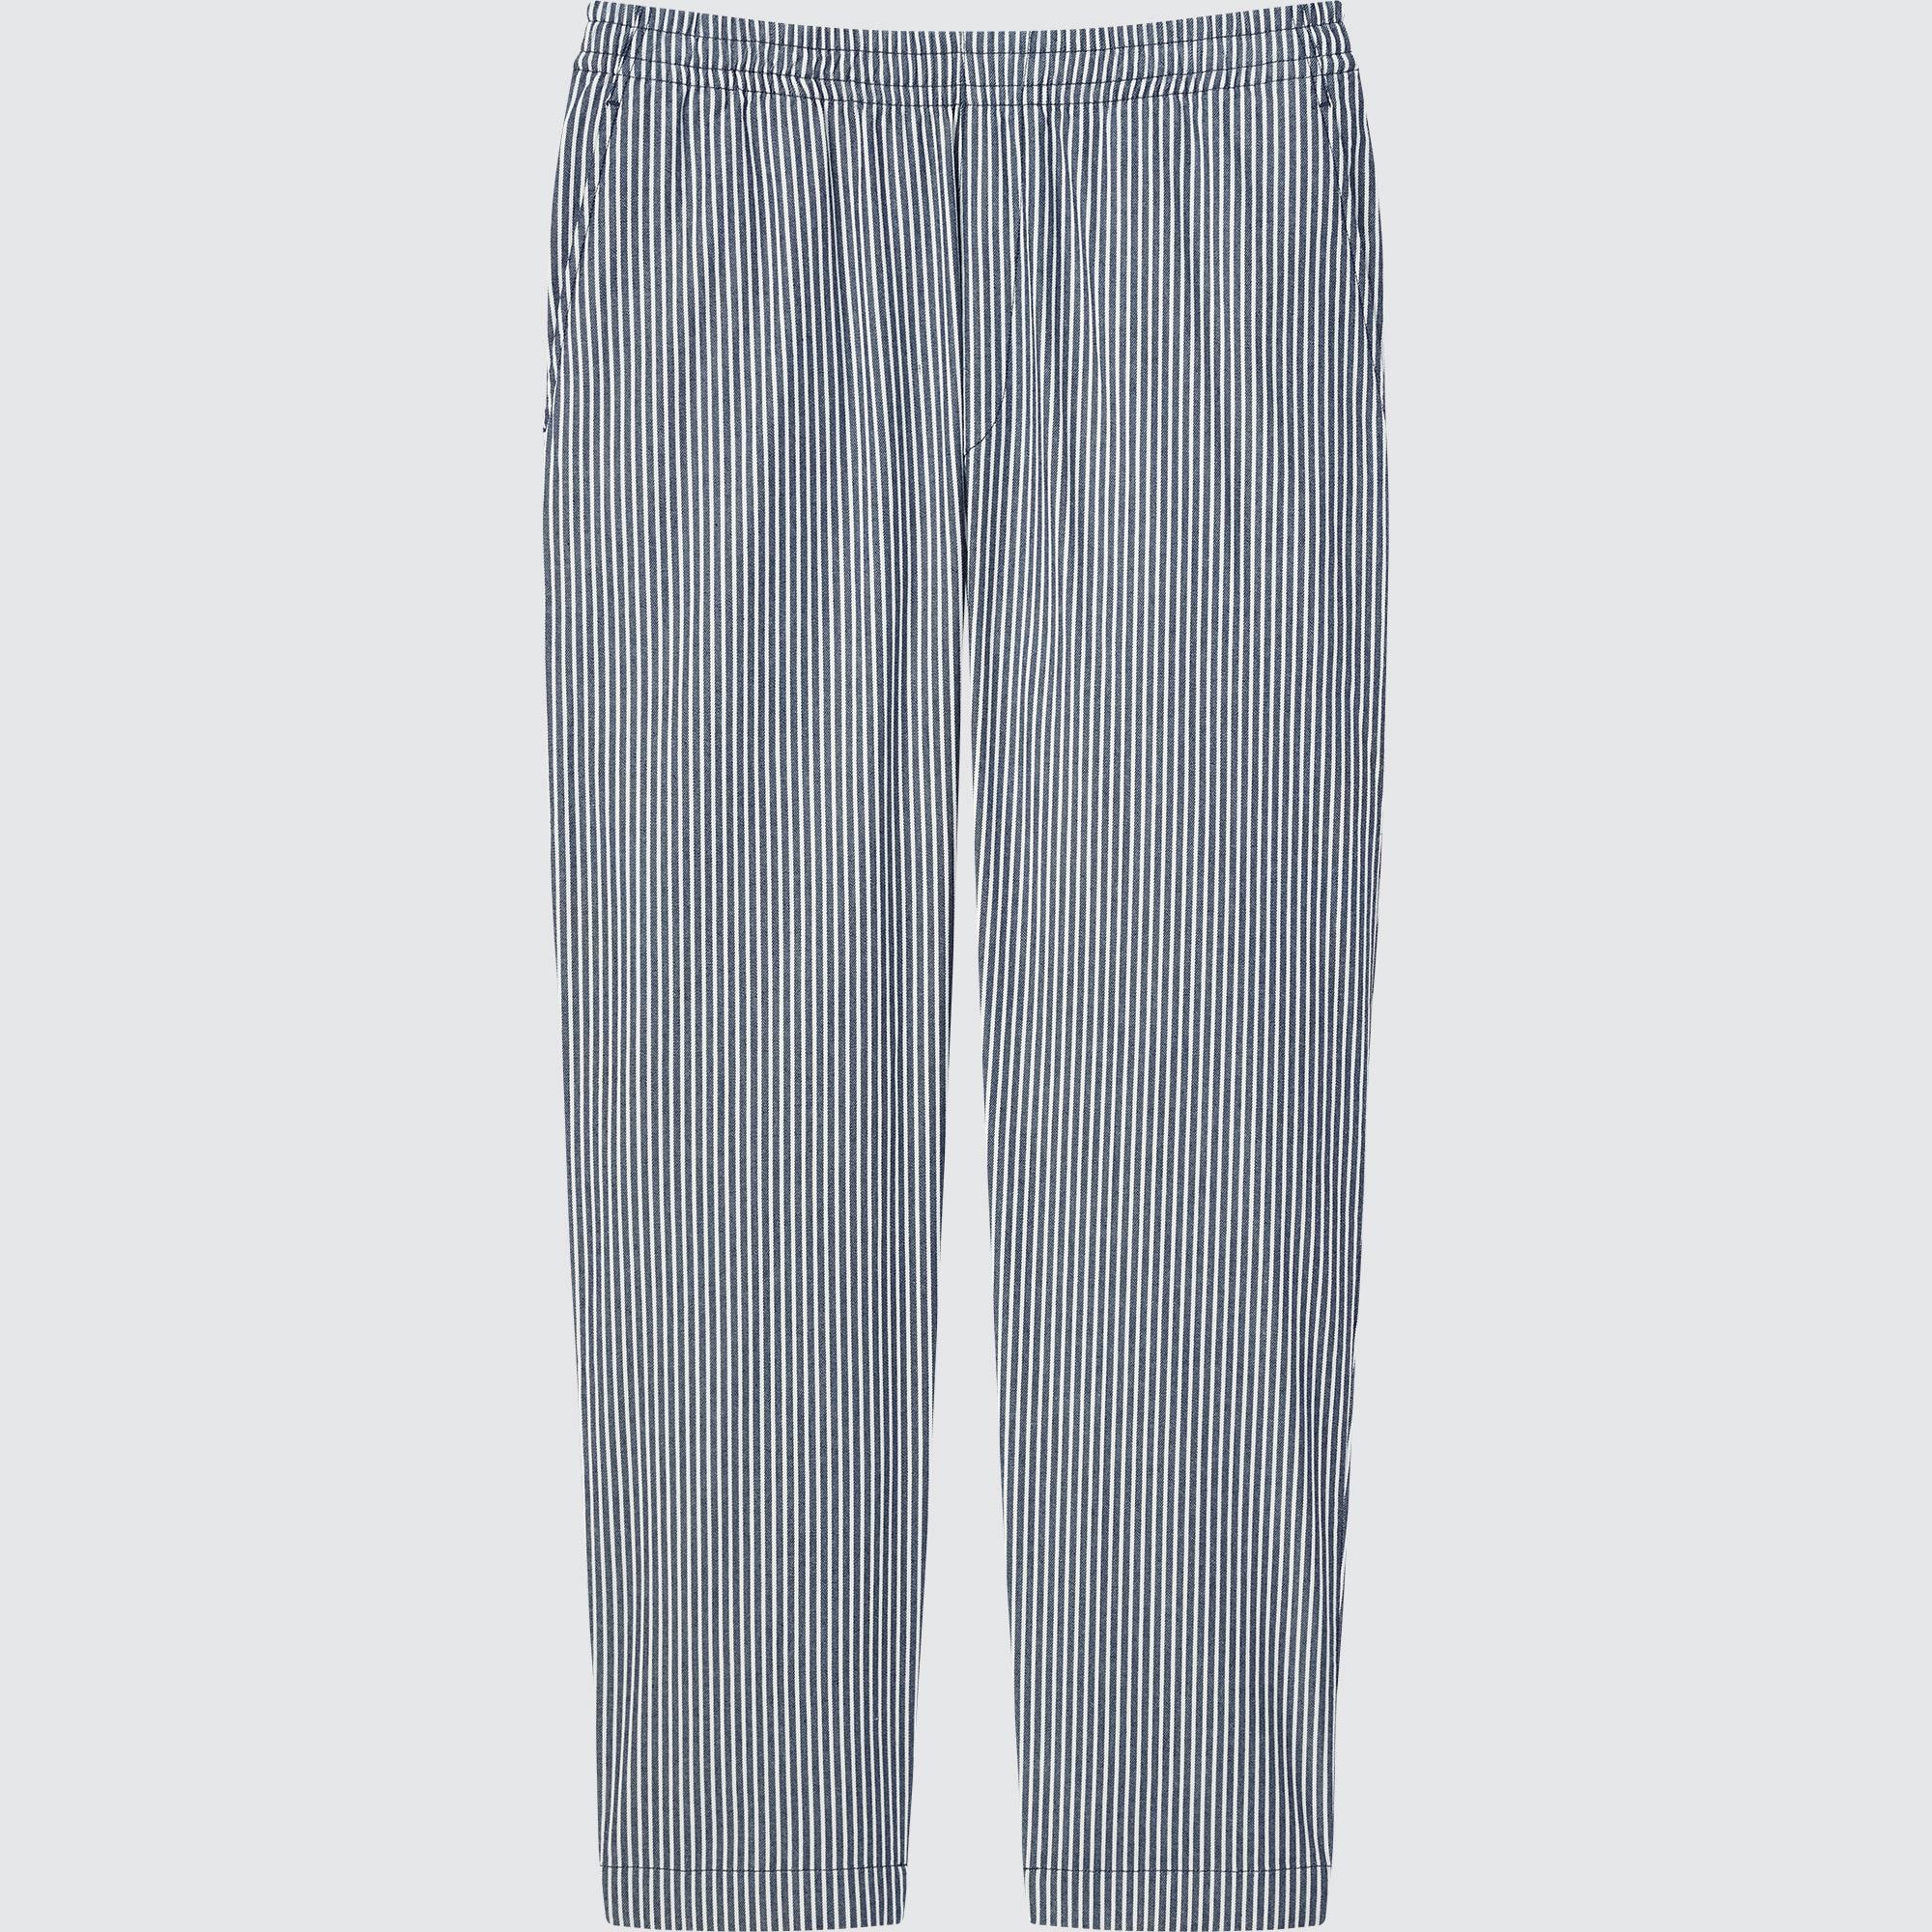 UNIQLO Hickory Easy Relaxed Ankle Pants | StyleHint